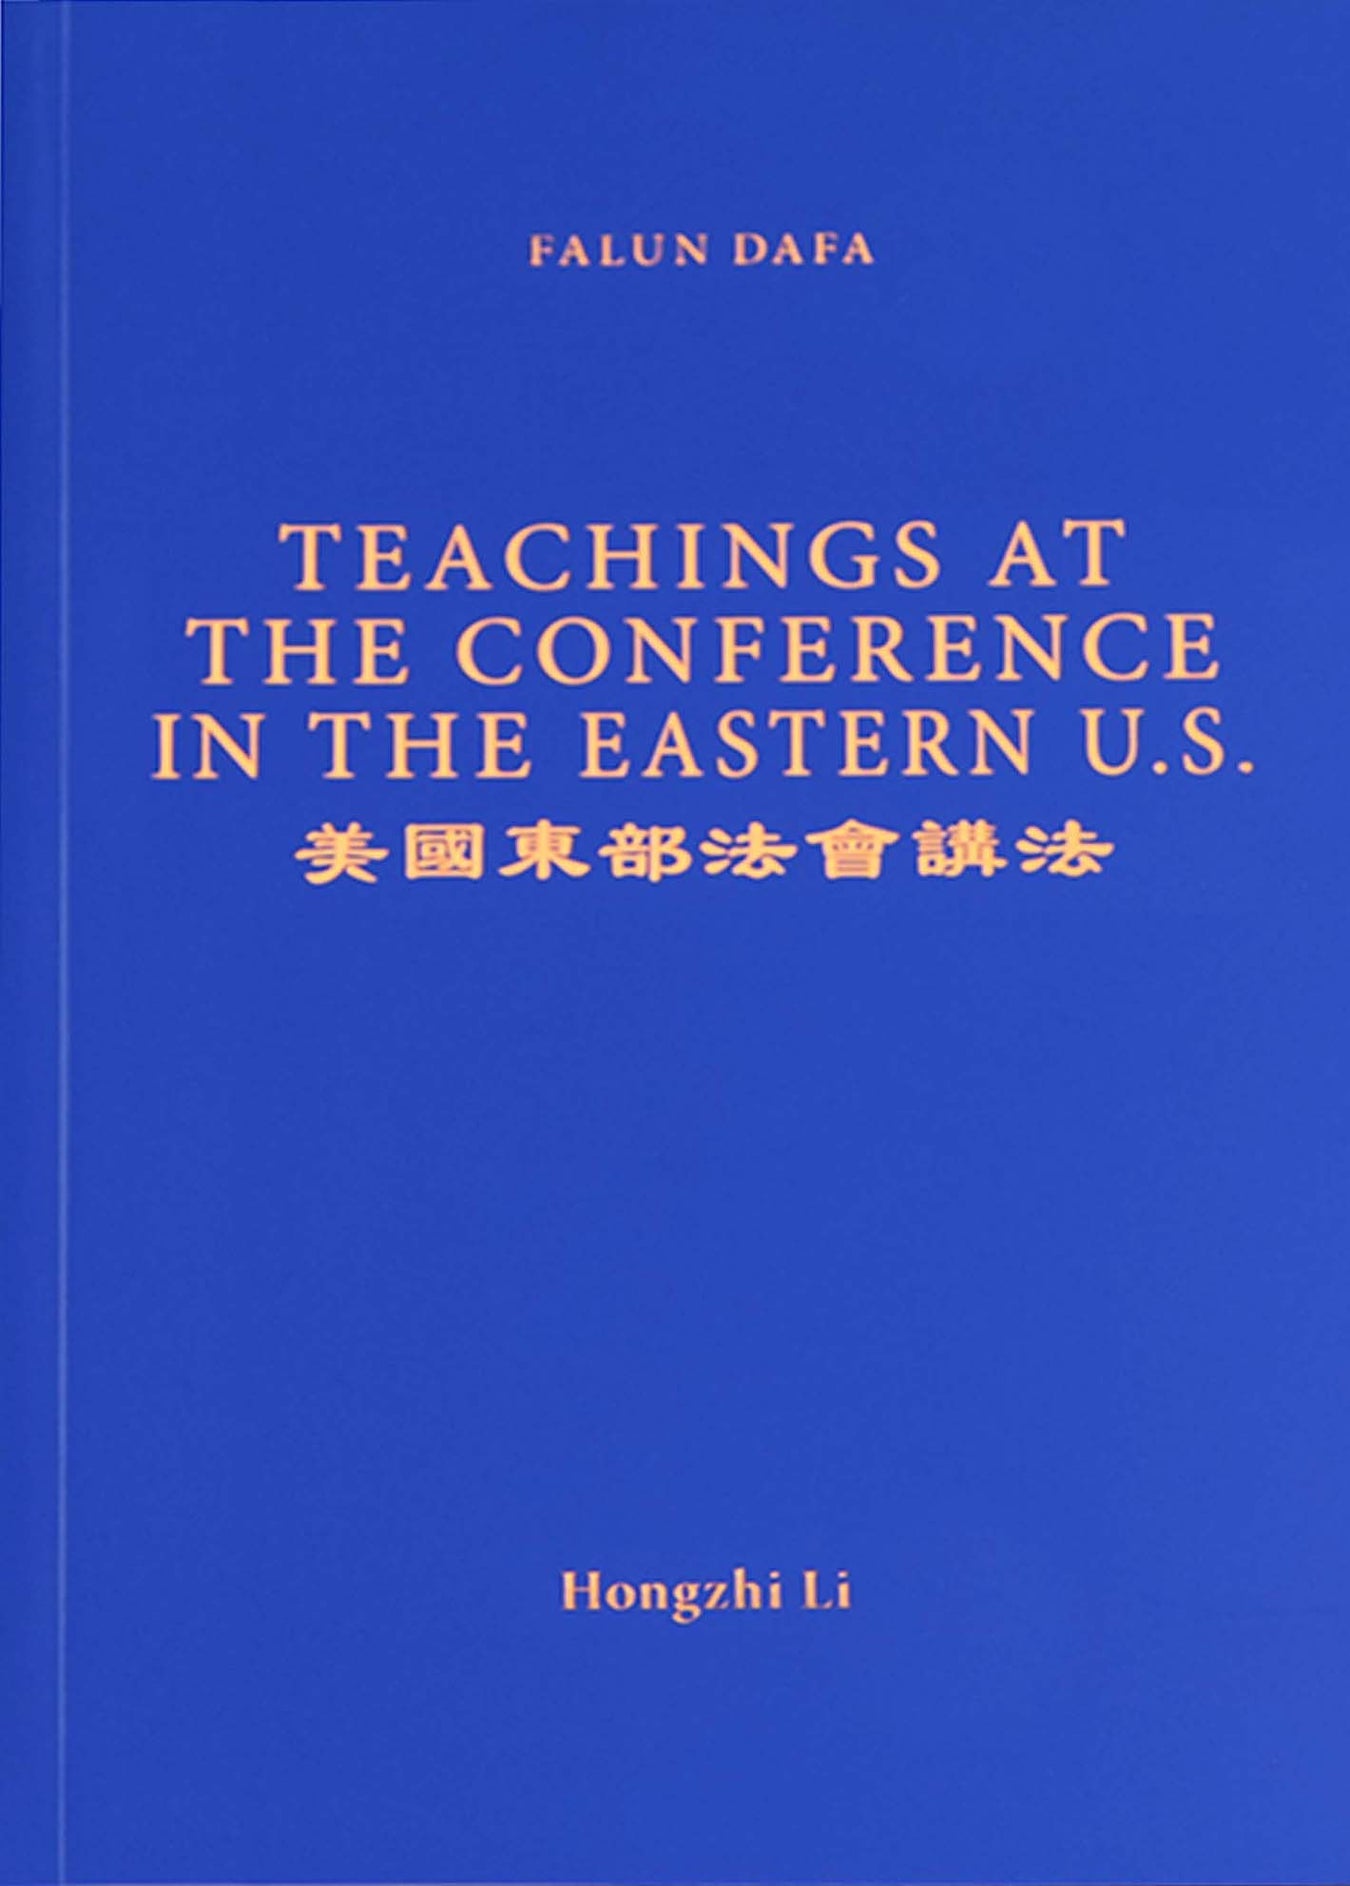 Teachings At The Conference In The Eastern U.S.